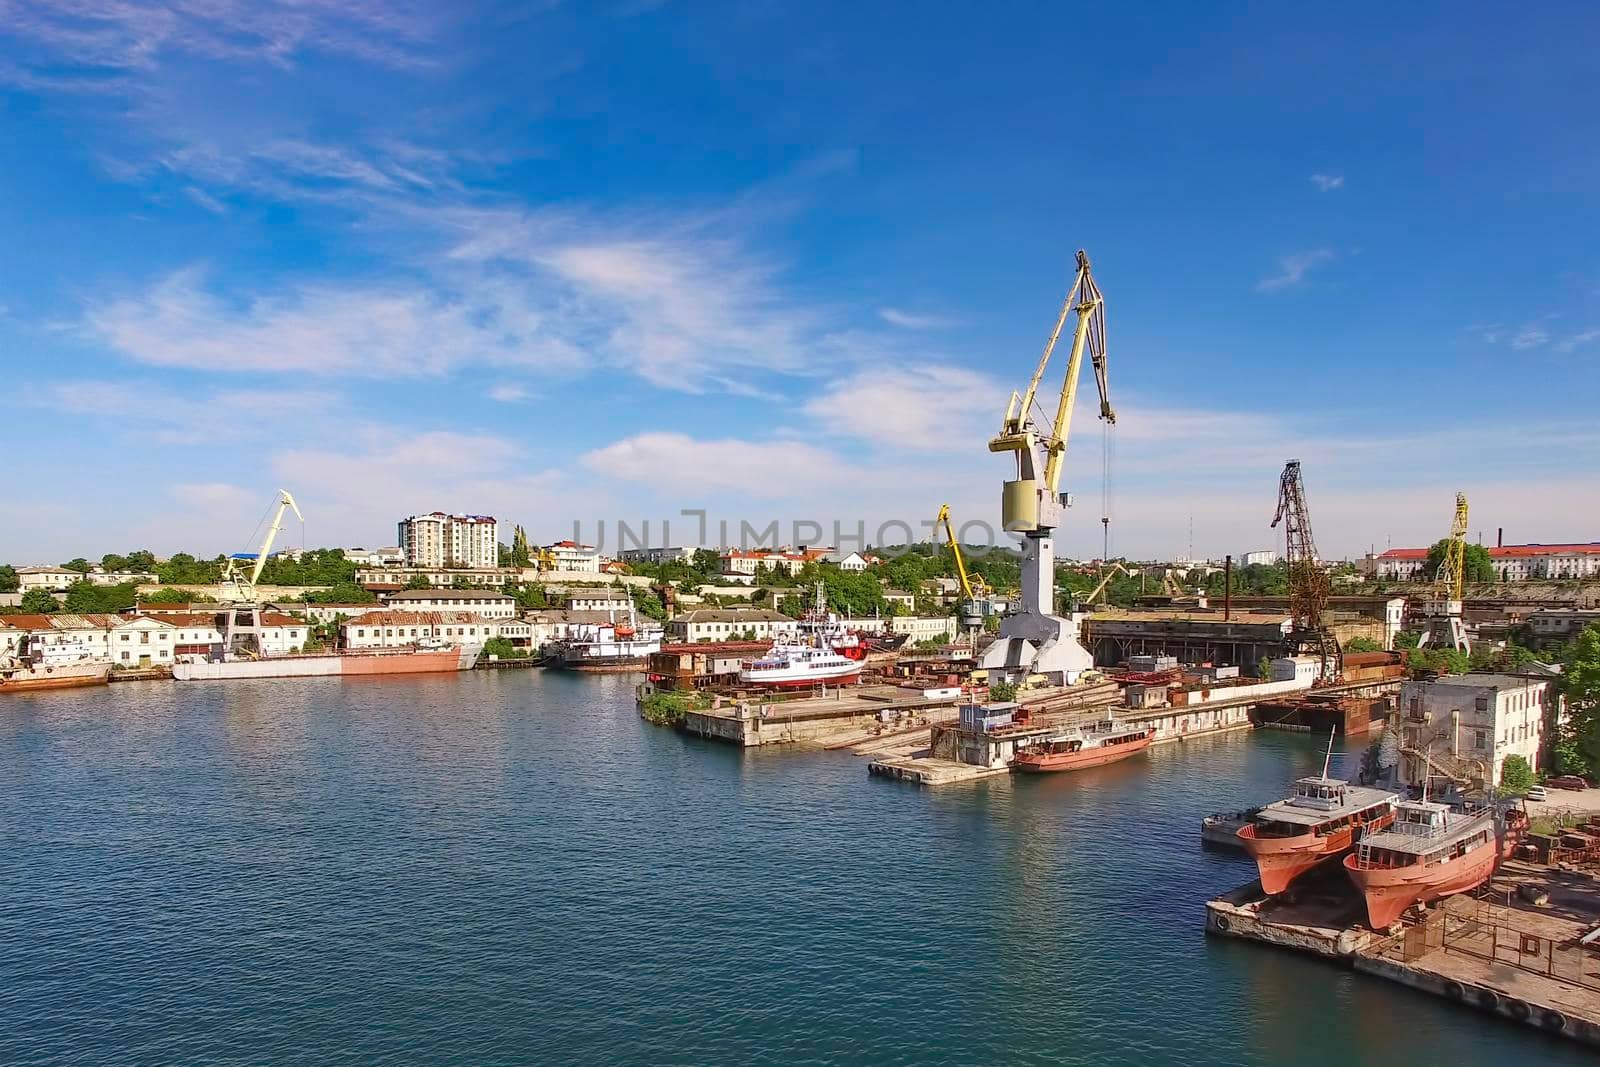 Aerial view of the cityscape overlooking the port with ships and cranes. Sevastopol, Crimea